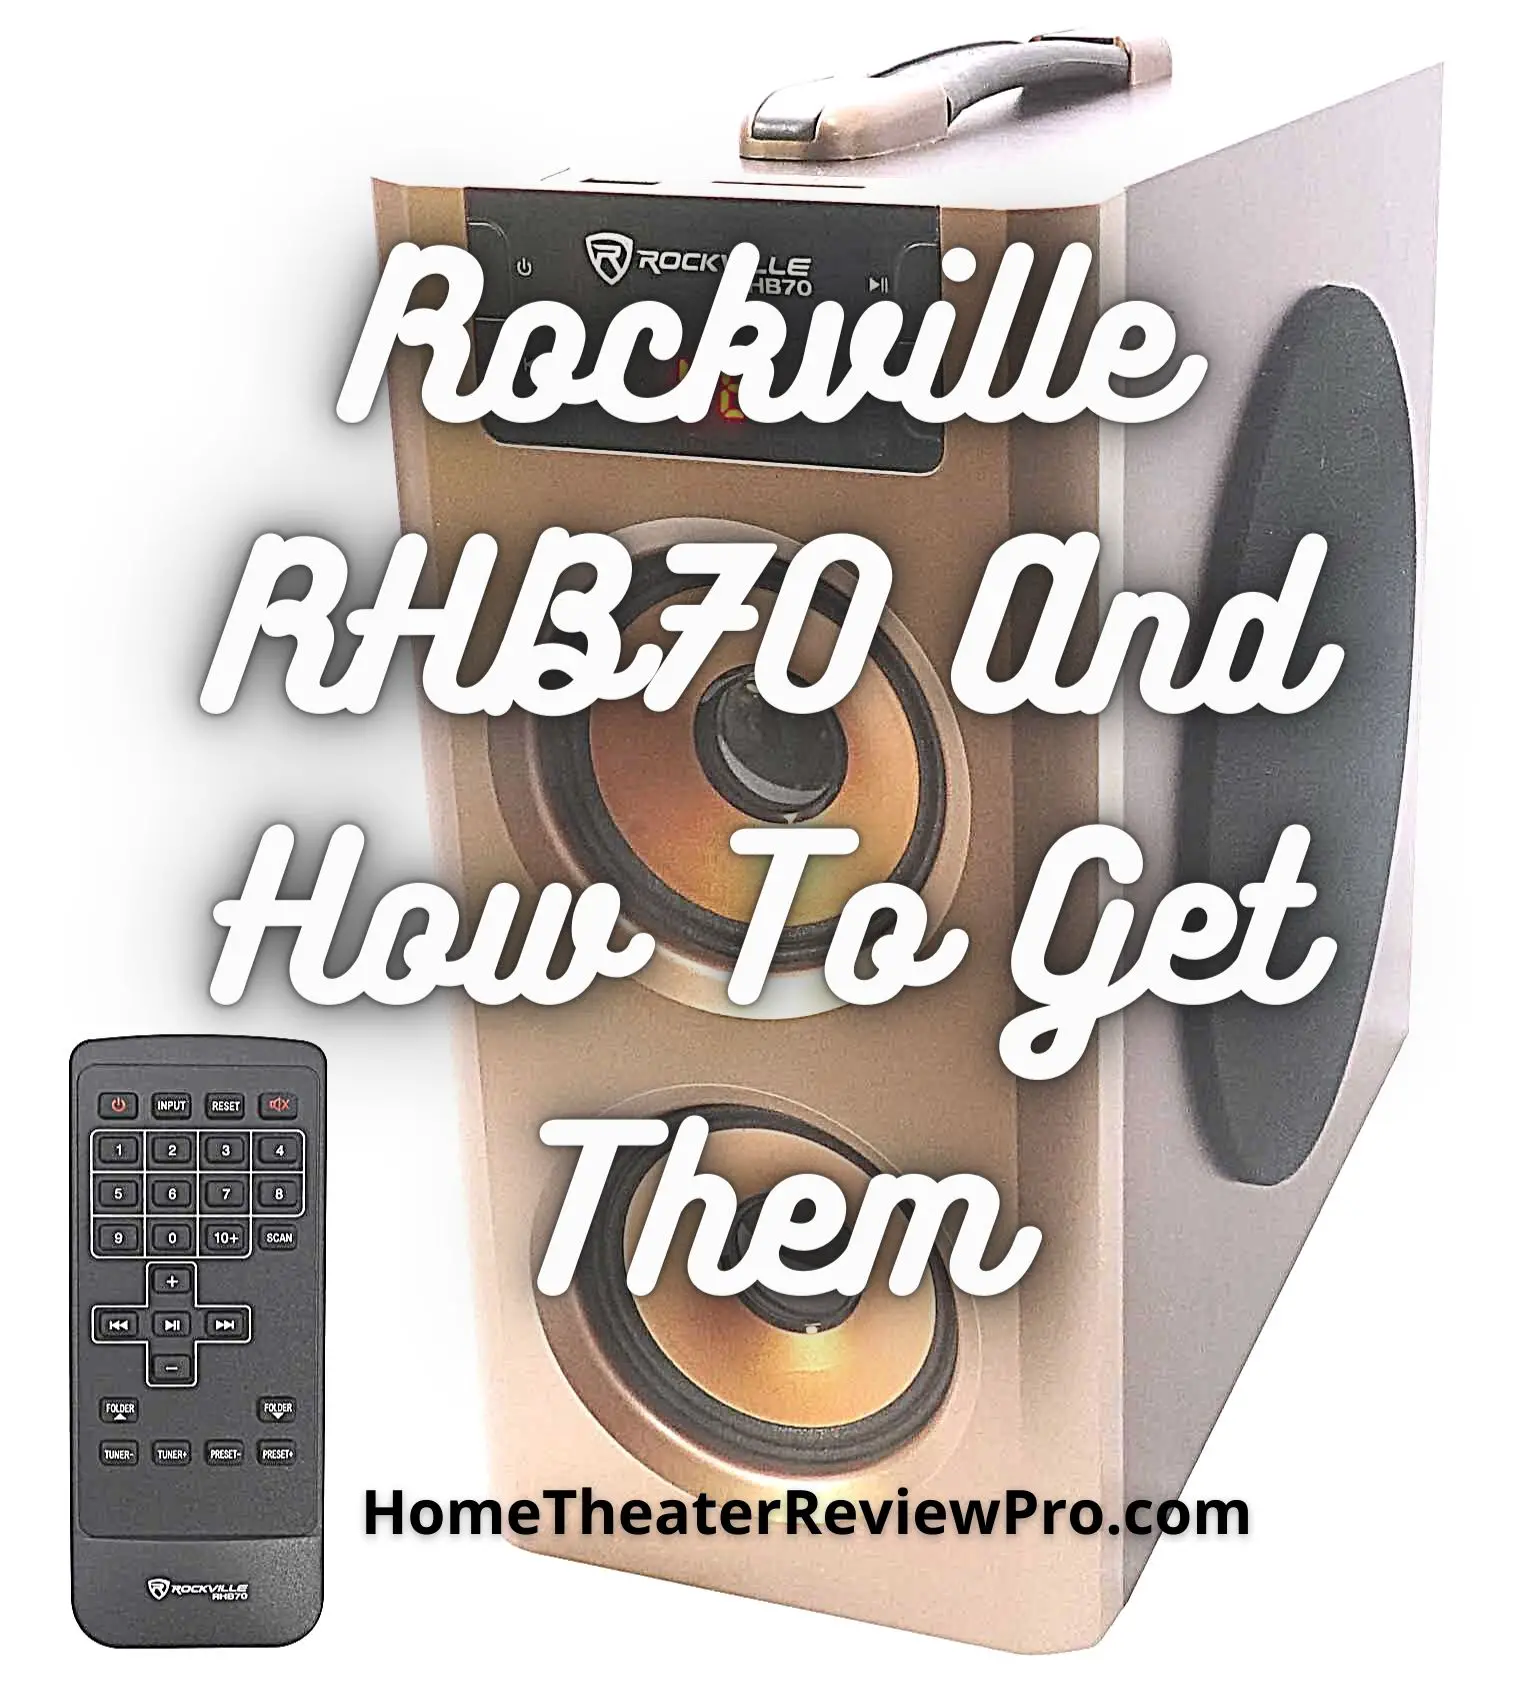 Rockville RHB70 And How To Get Them